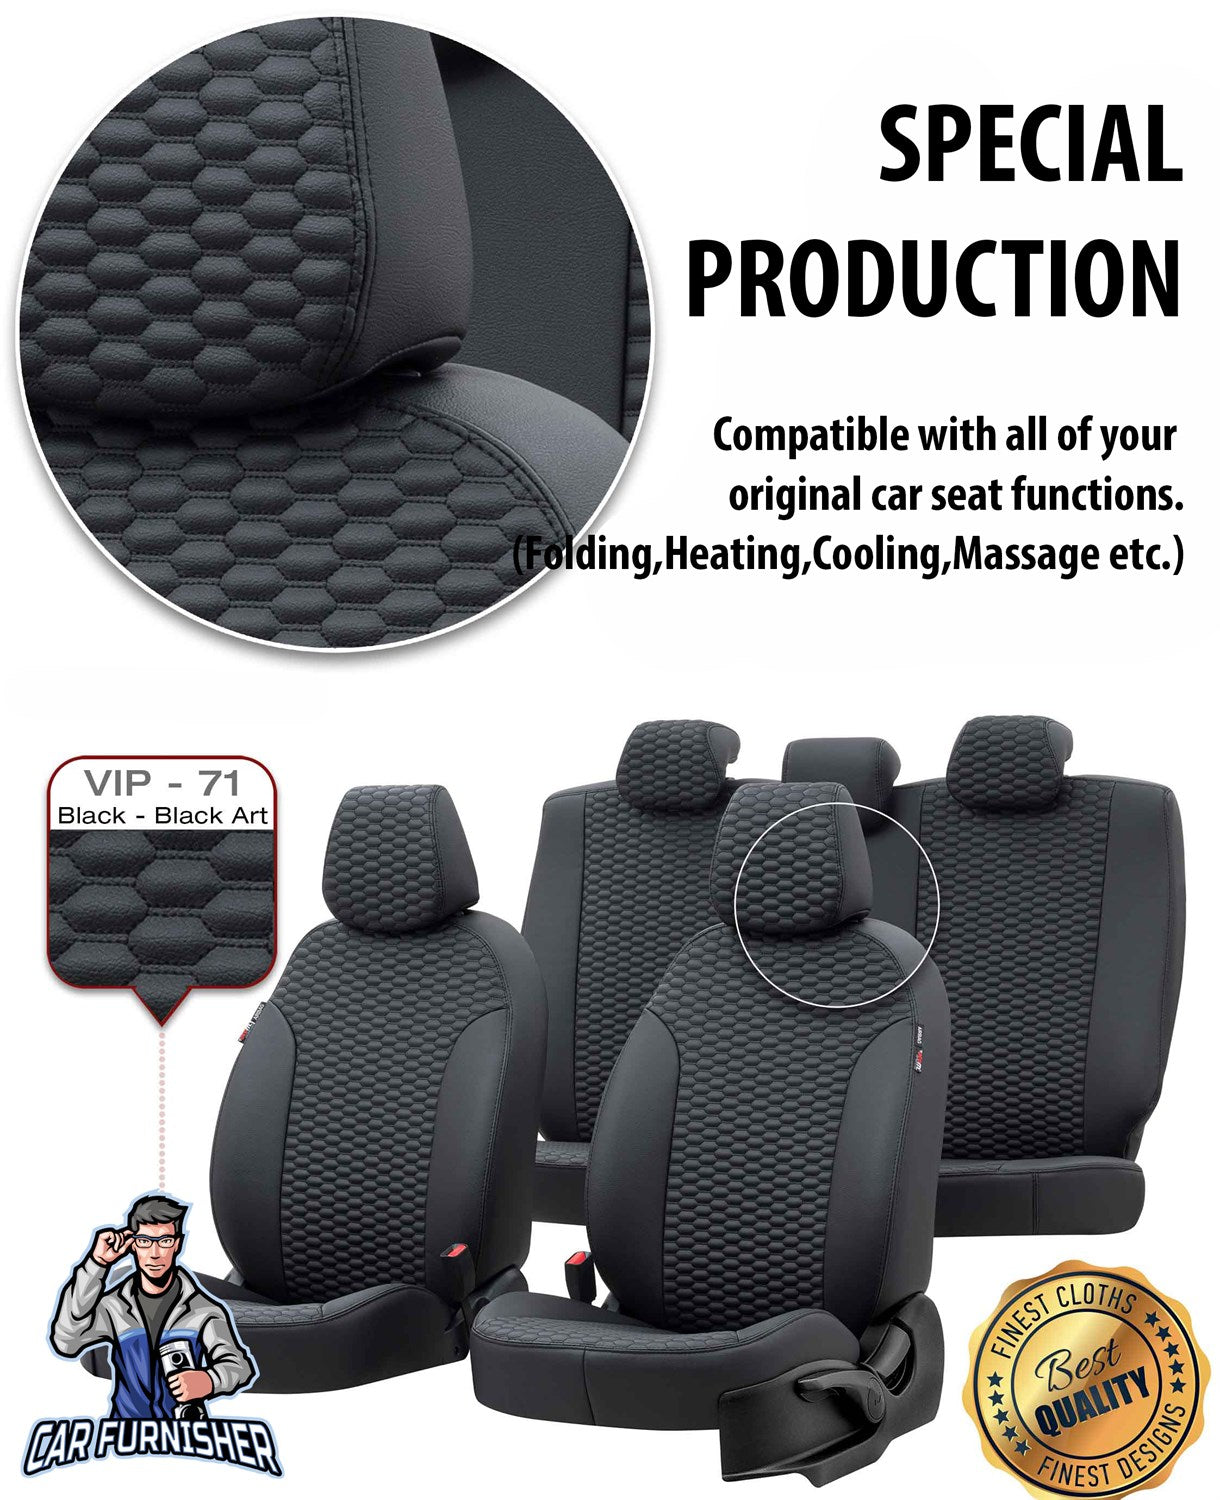 Mercedes GLC Class Seat Covers Tokyo Leather Design Black Leather